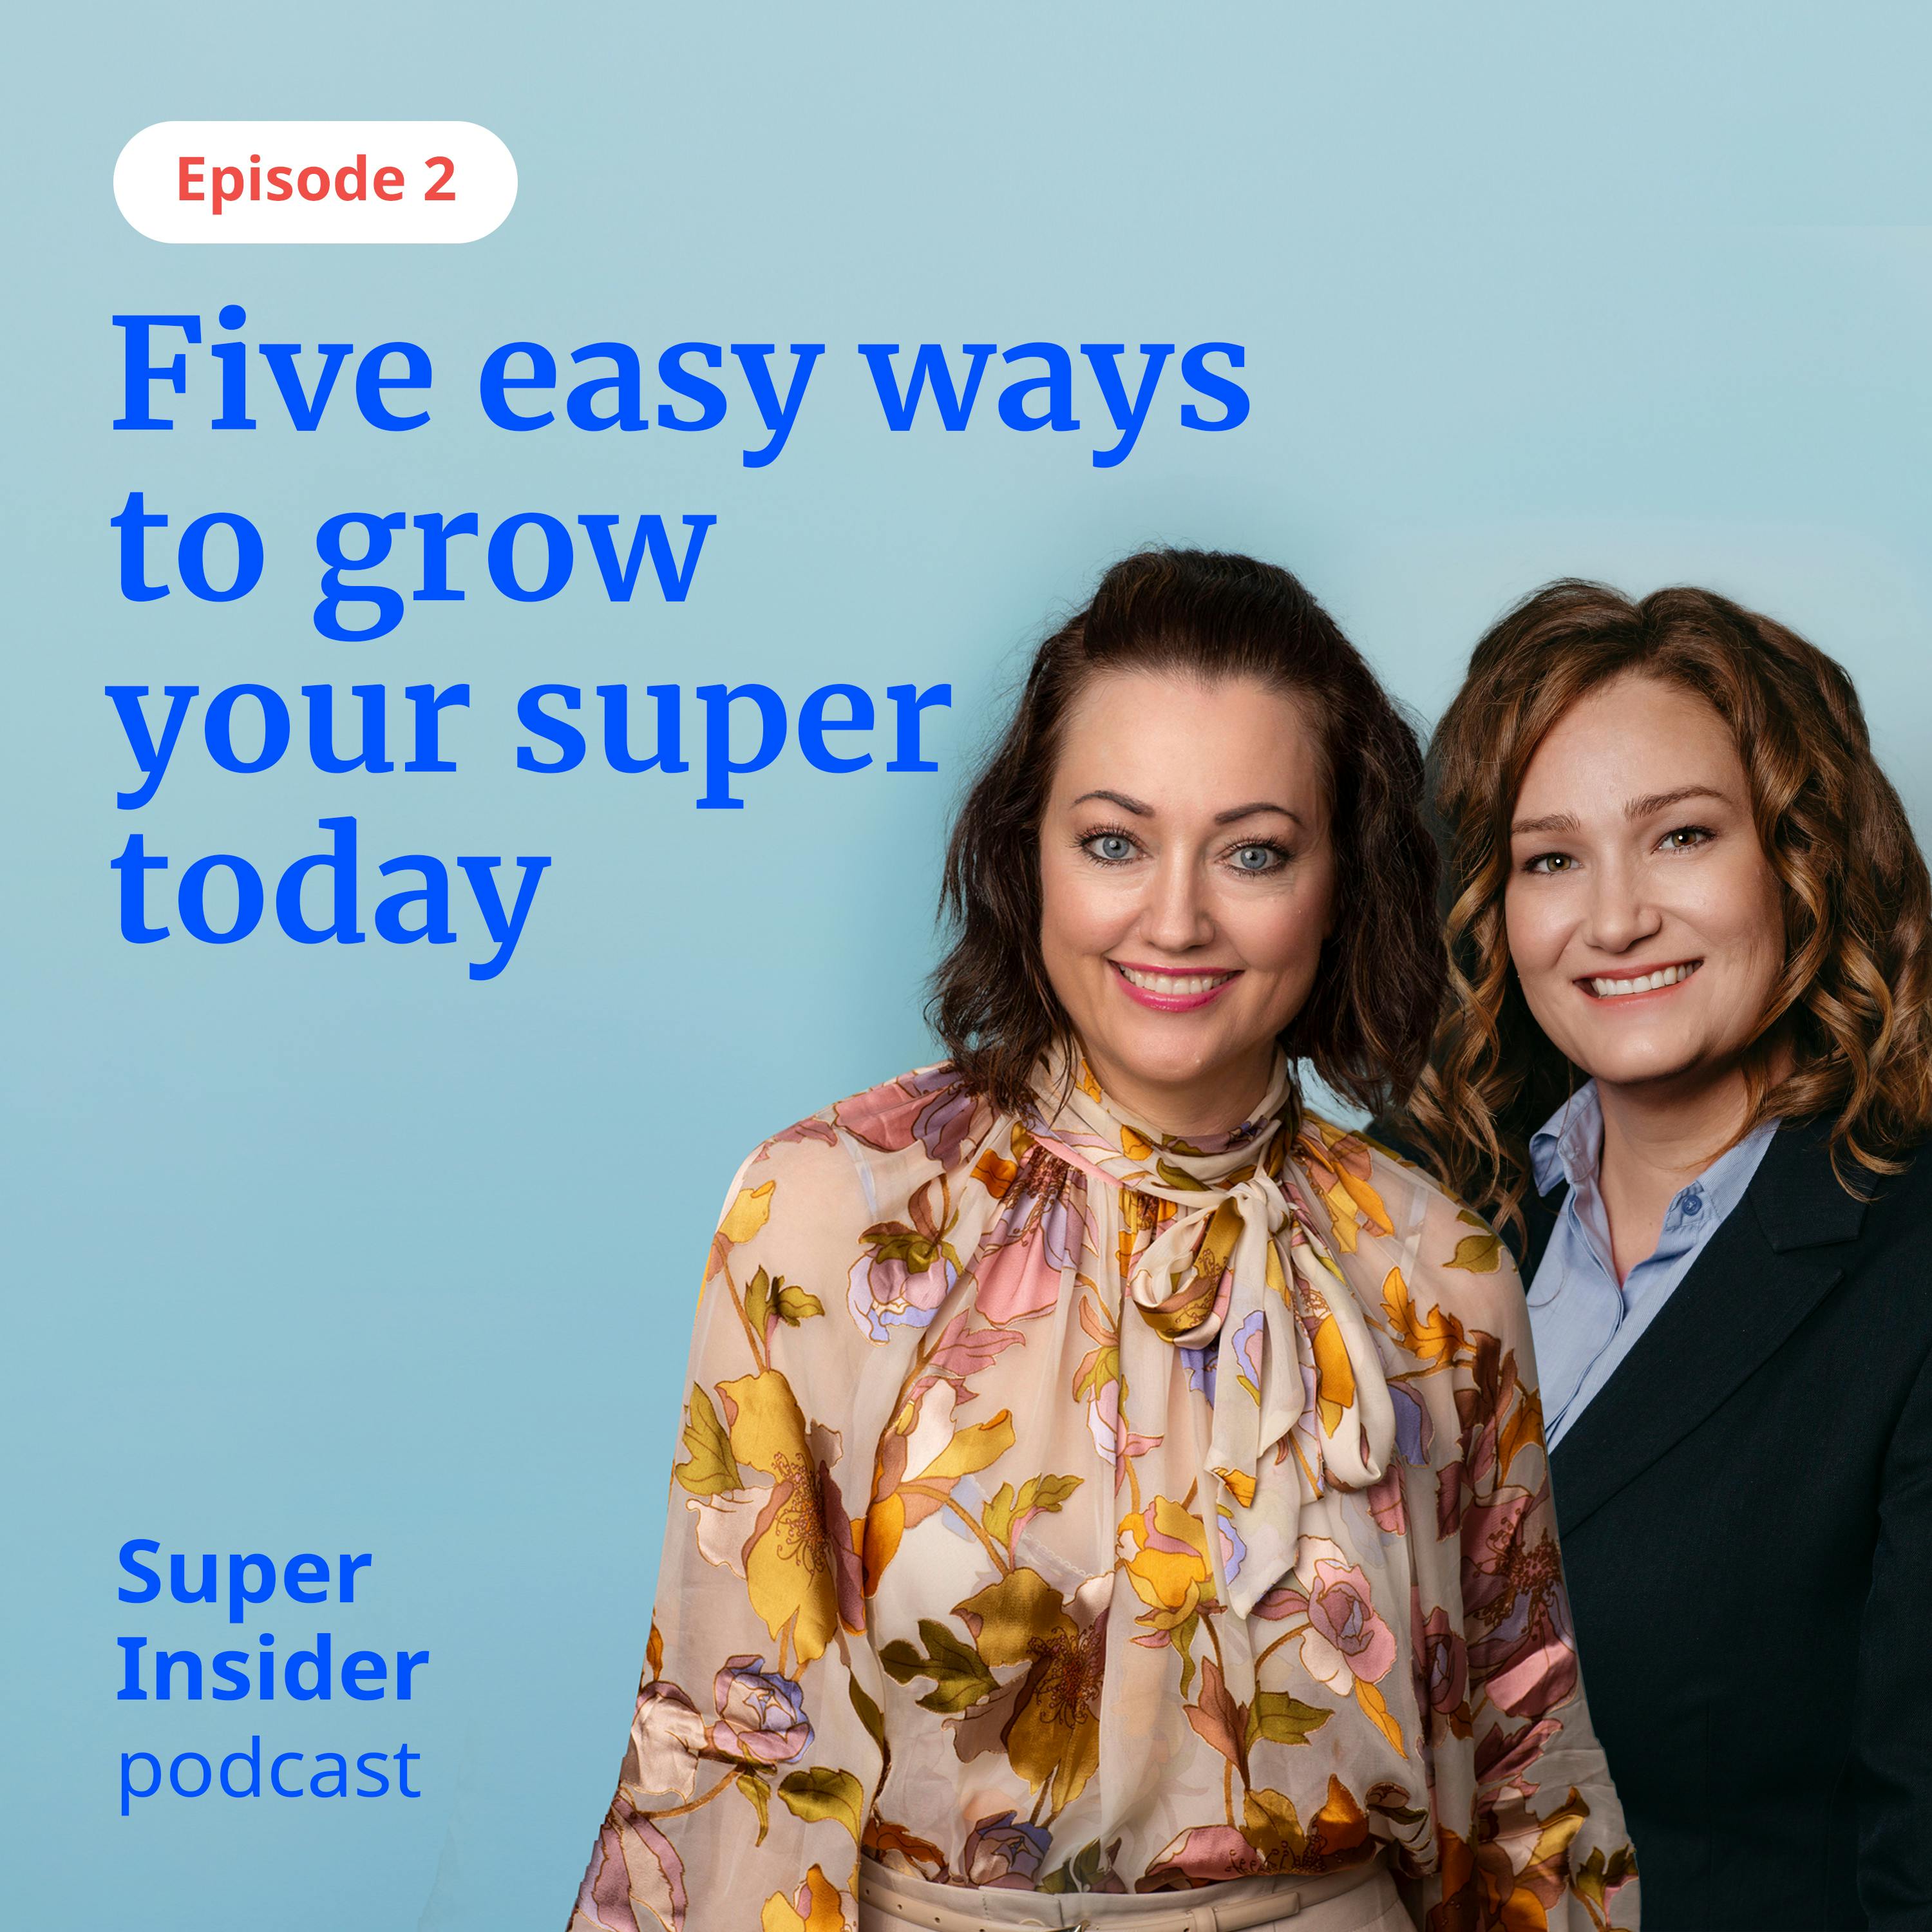 Five easy ways to grow your superannuation today